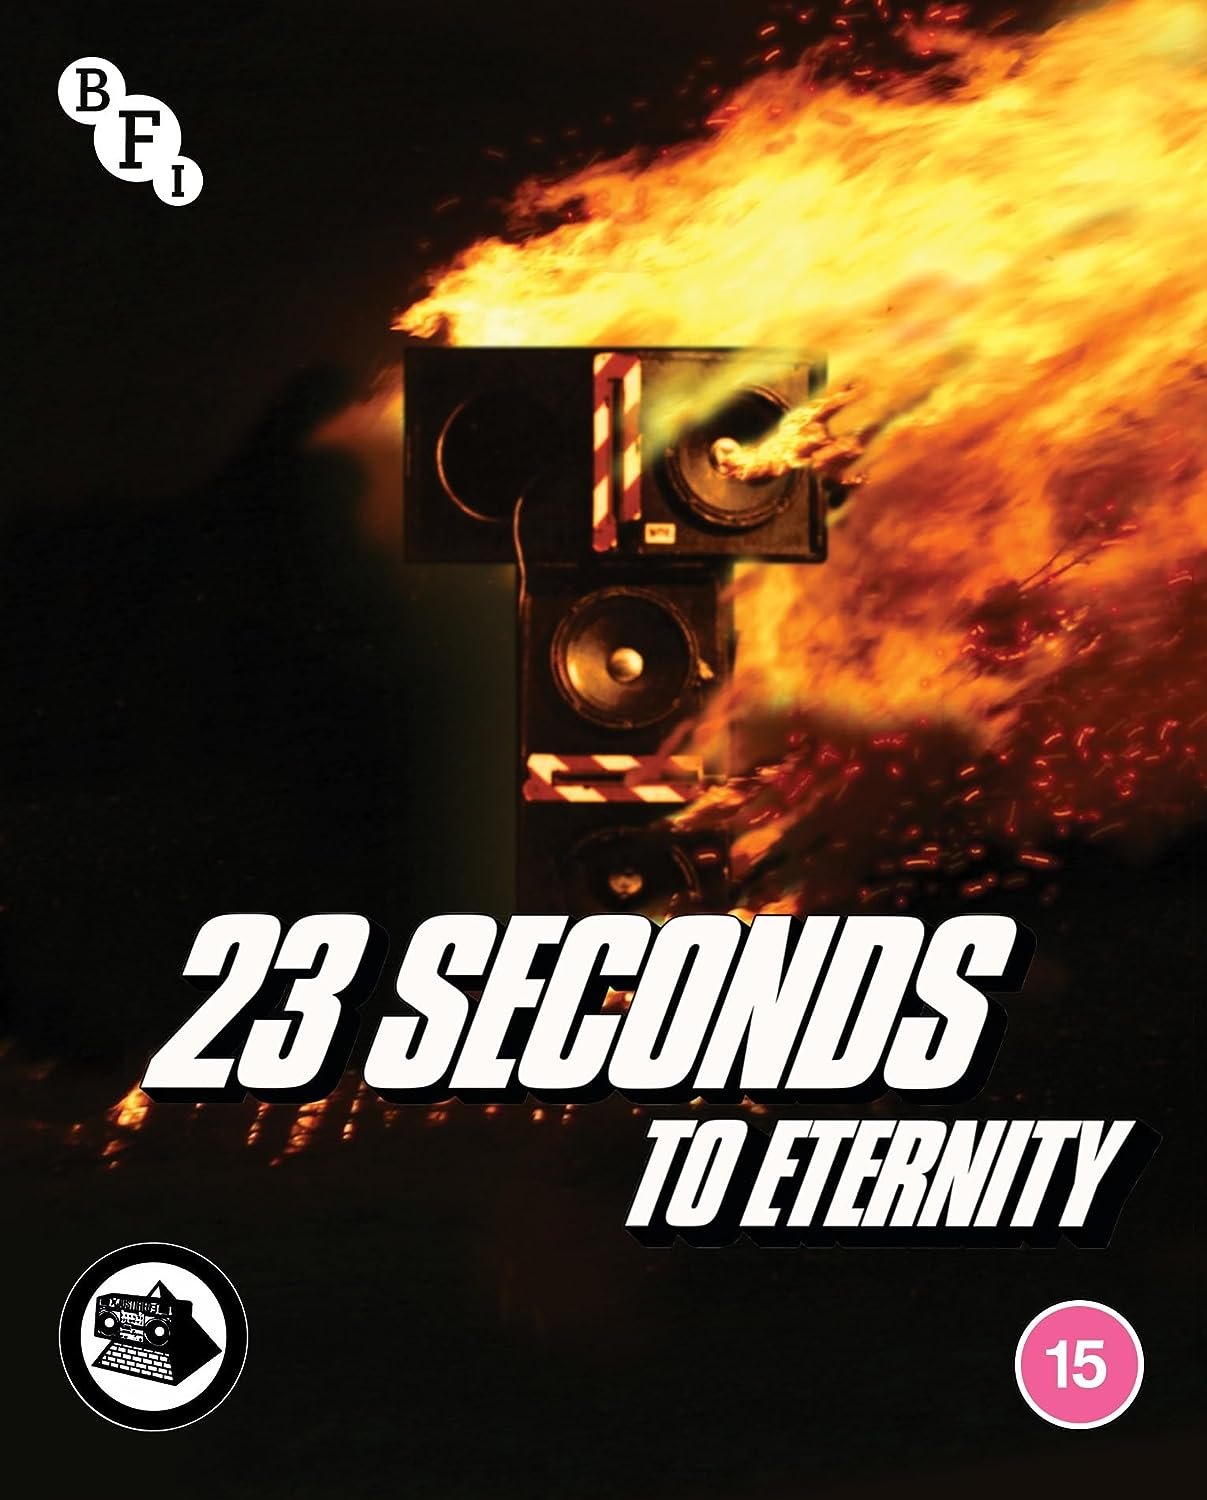 CD Shop - KLF 23 SECONDS TO ETERNITY